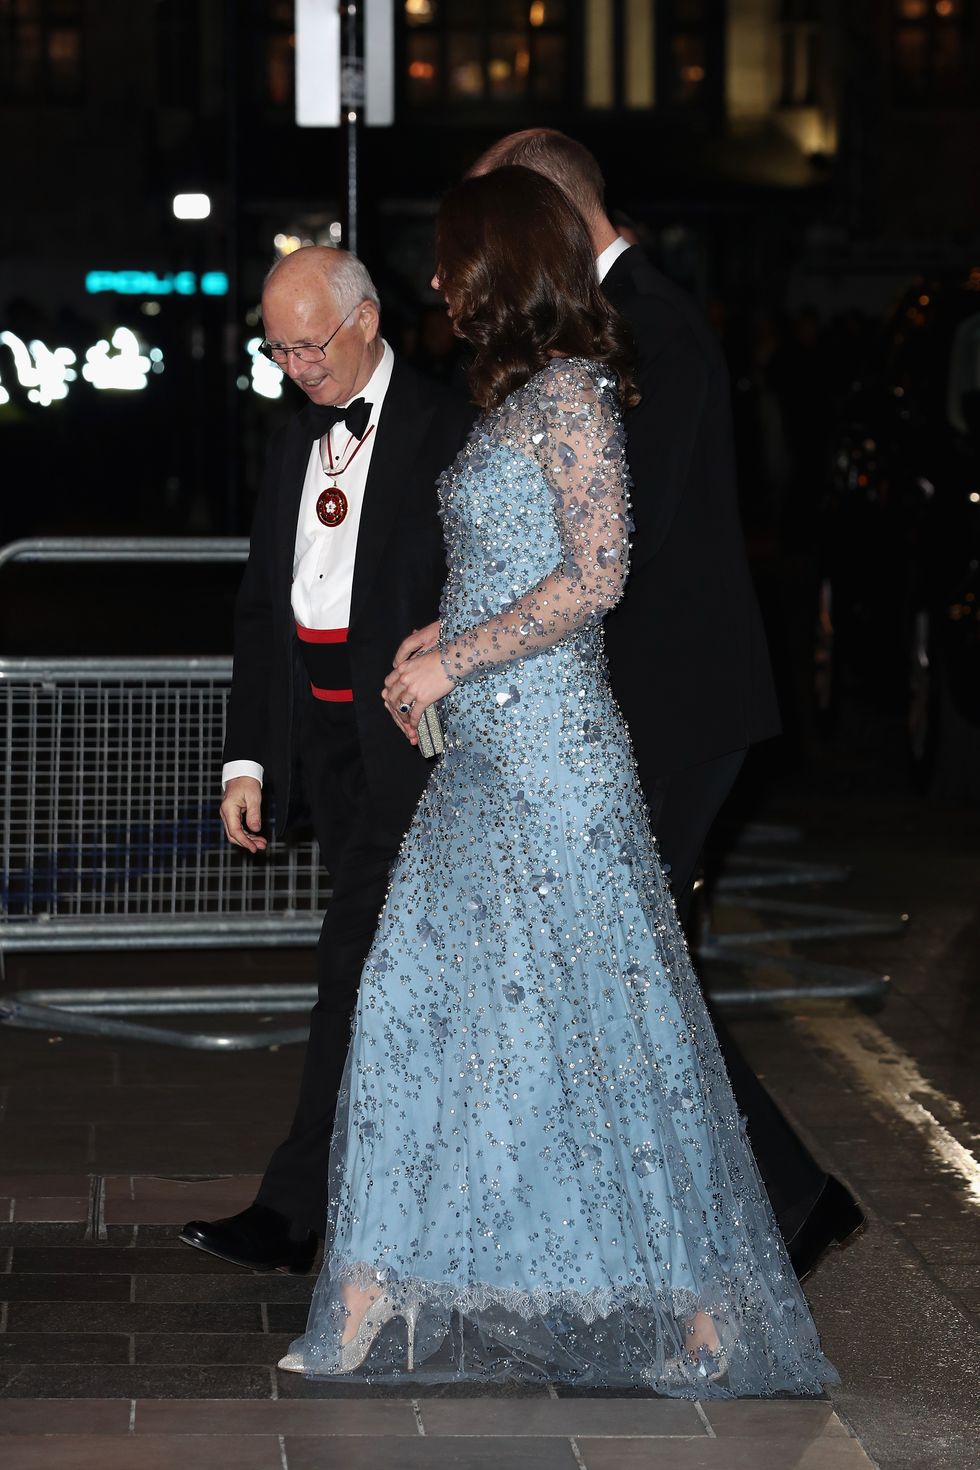 The Duchess of Cambridge at the Royal Variety Performance